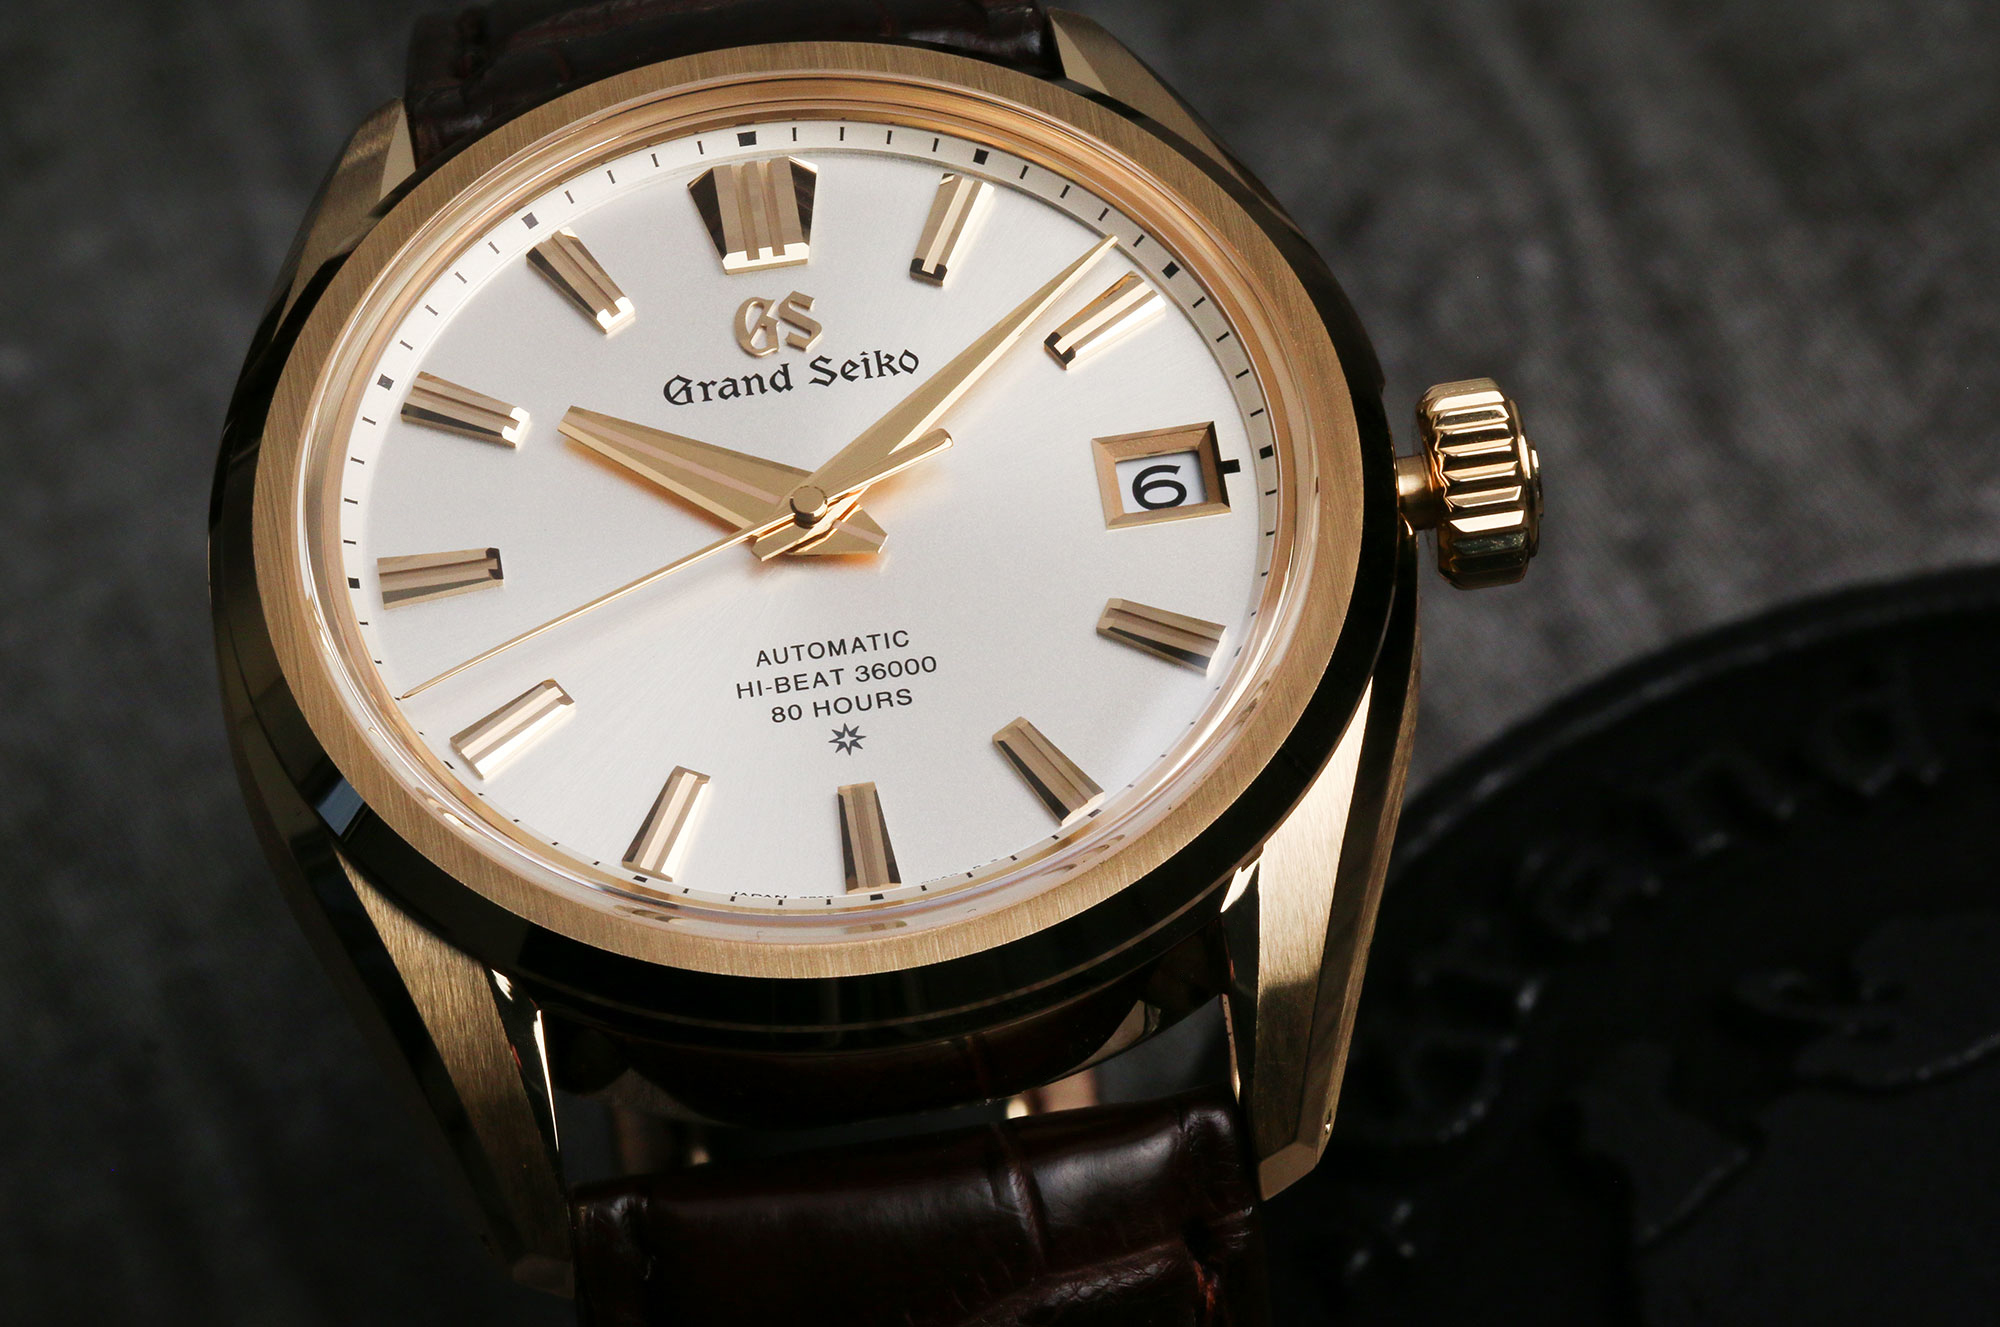 Grand Seiko SLGH002 with a gold case and light dial.